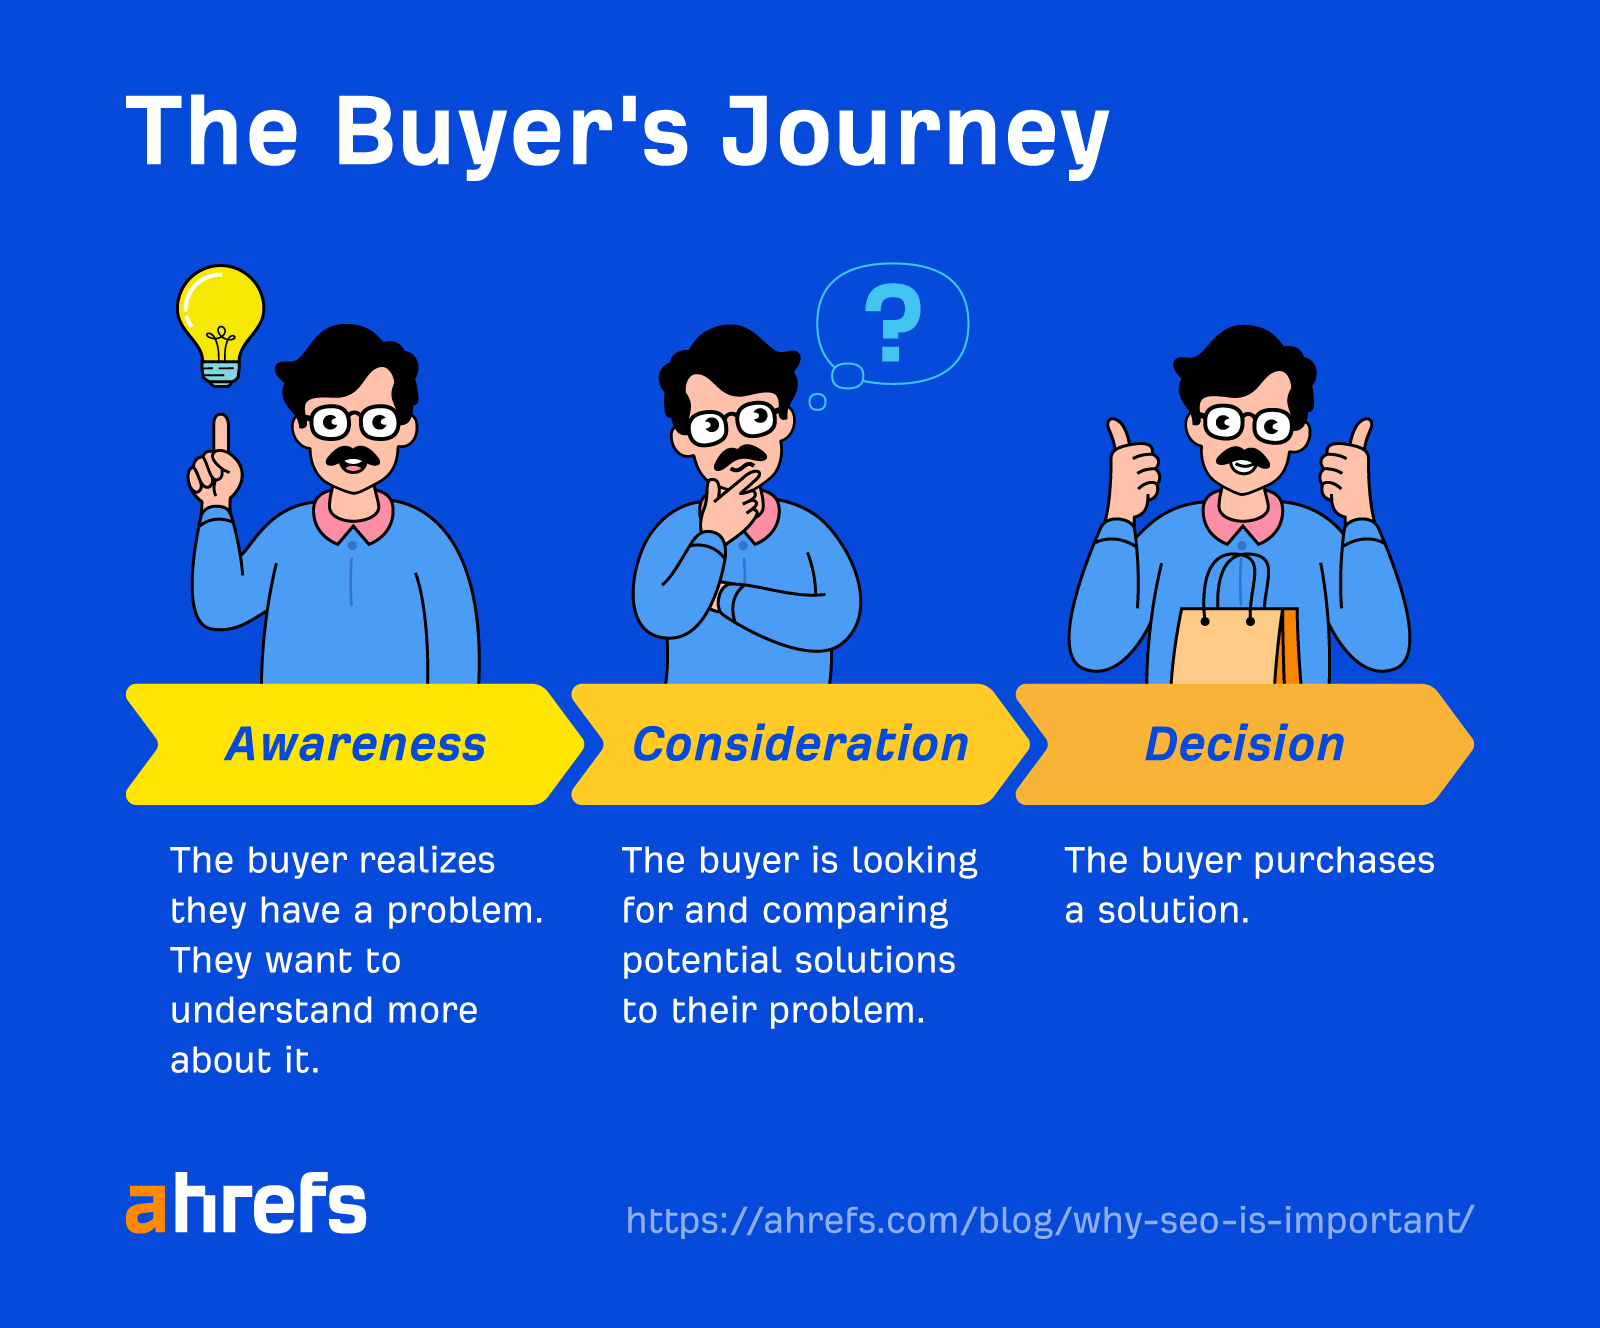 The buyer's journey: awareness, consideration, and decision